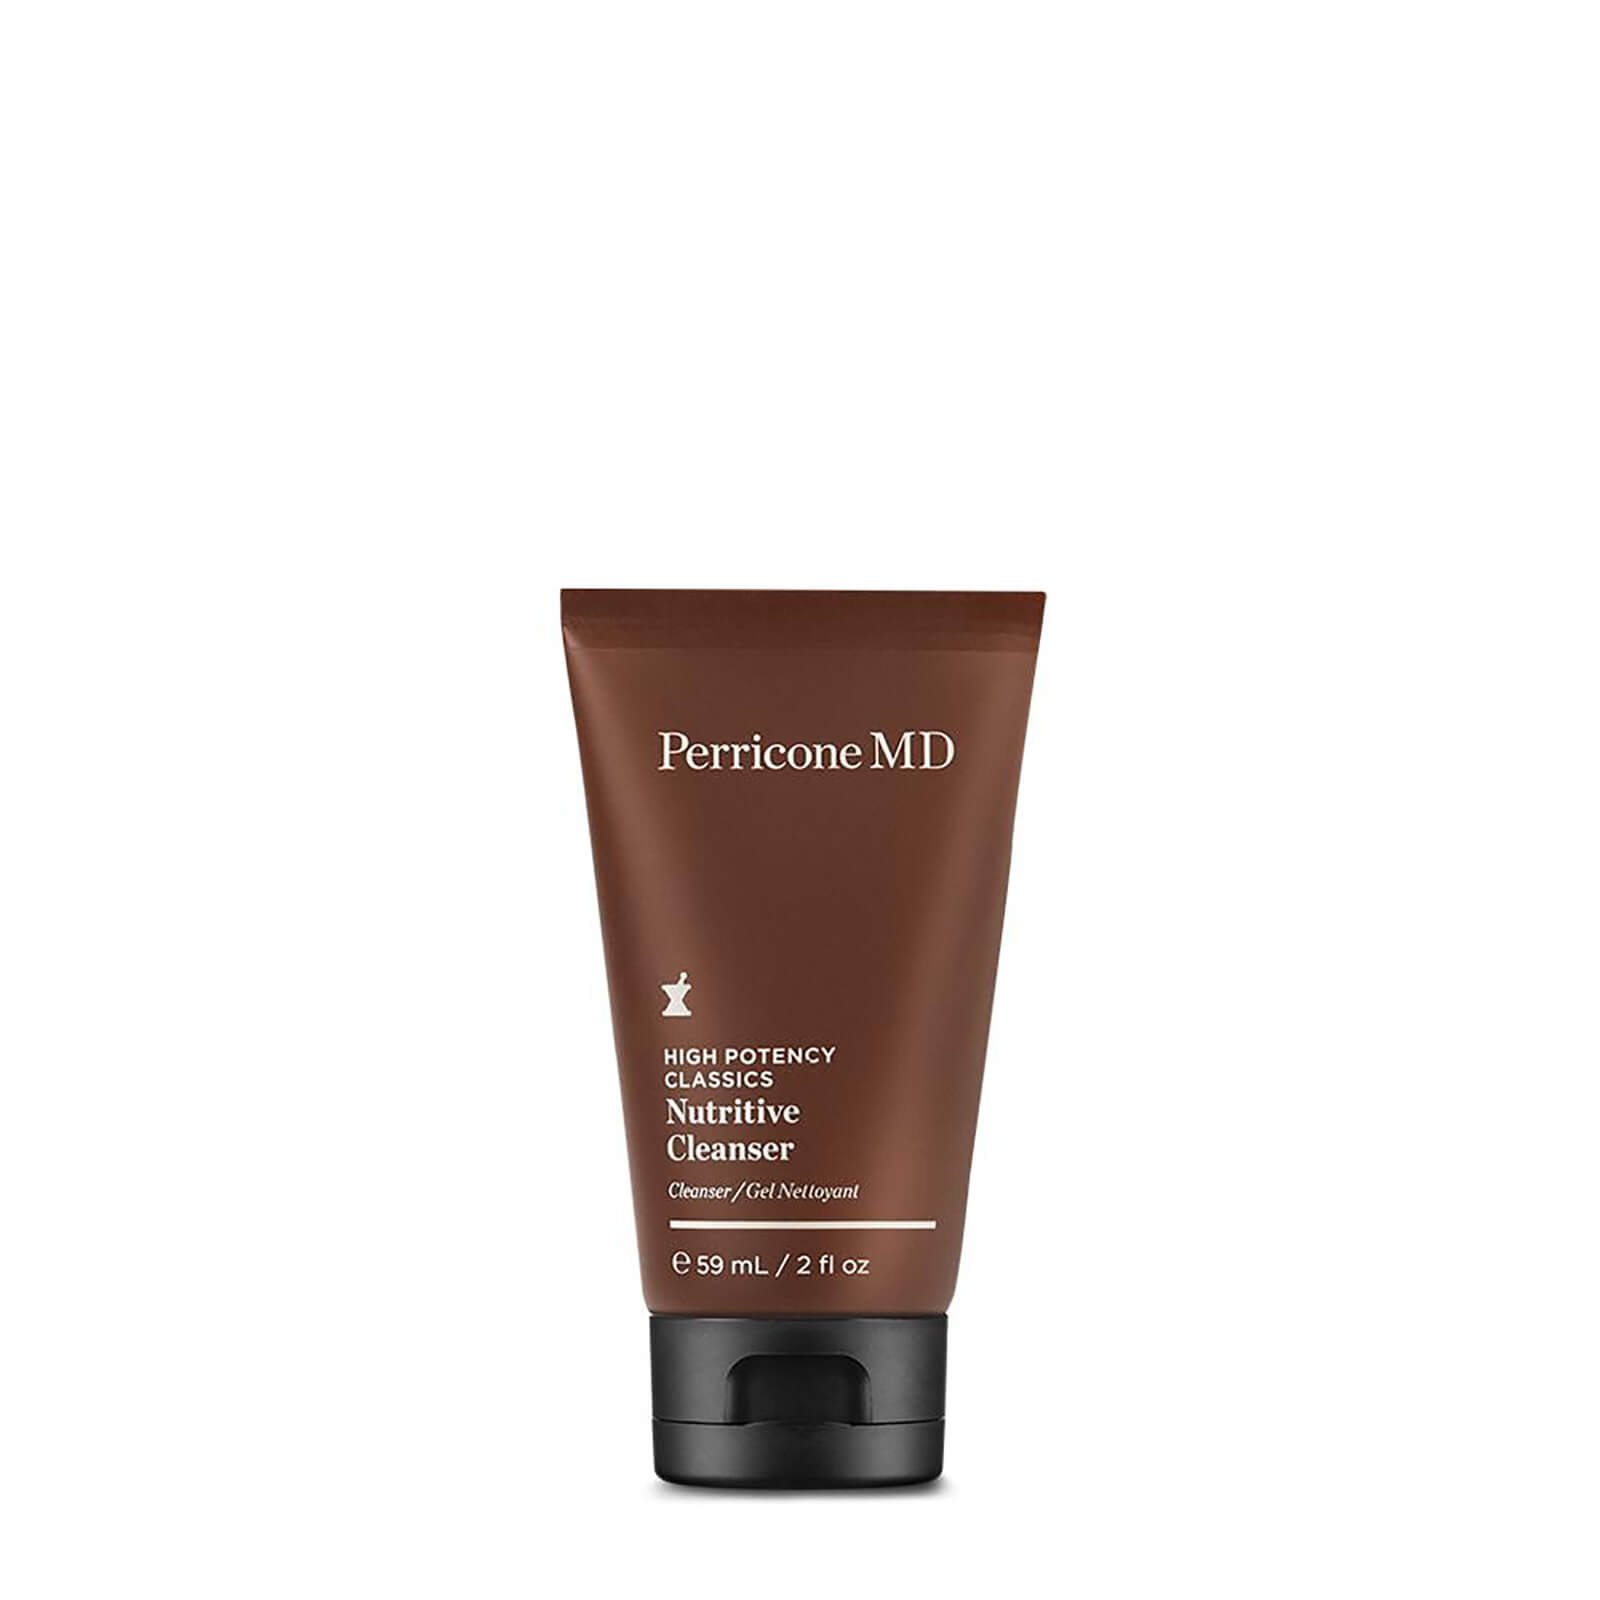 Perricone MD High Potency Classics Nutritive Cleanser - 59ml